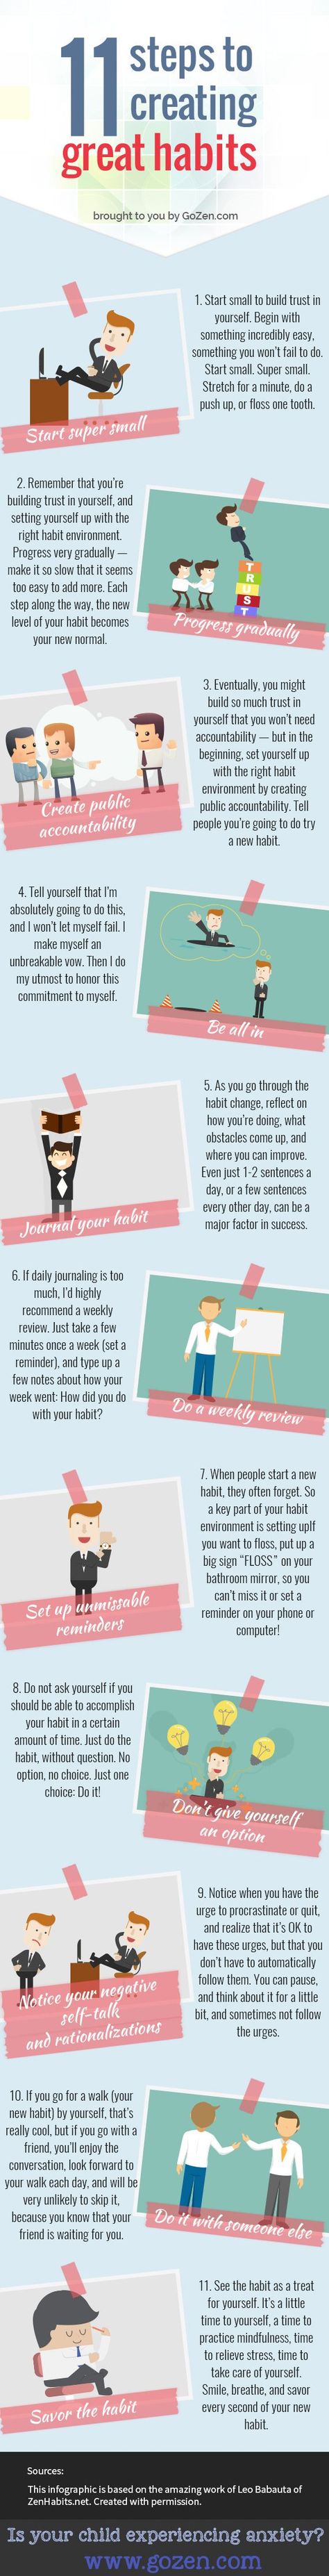 11 Steps to Creating Great Habits - Infographic Facts